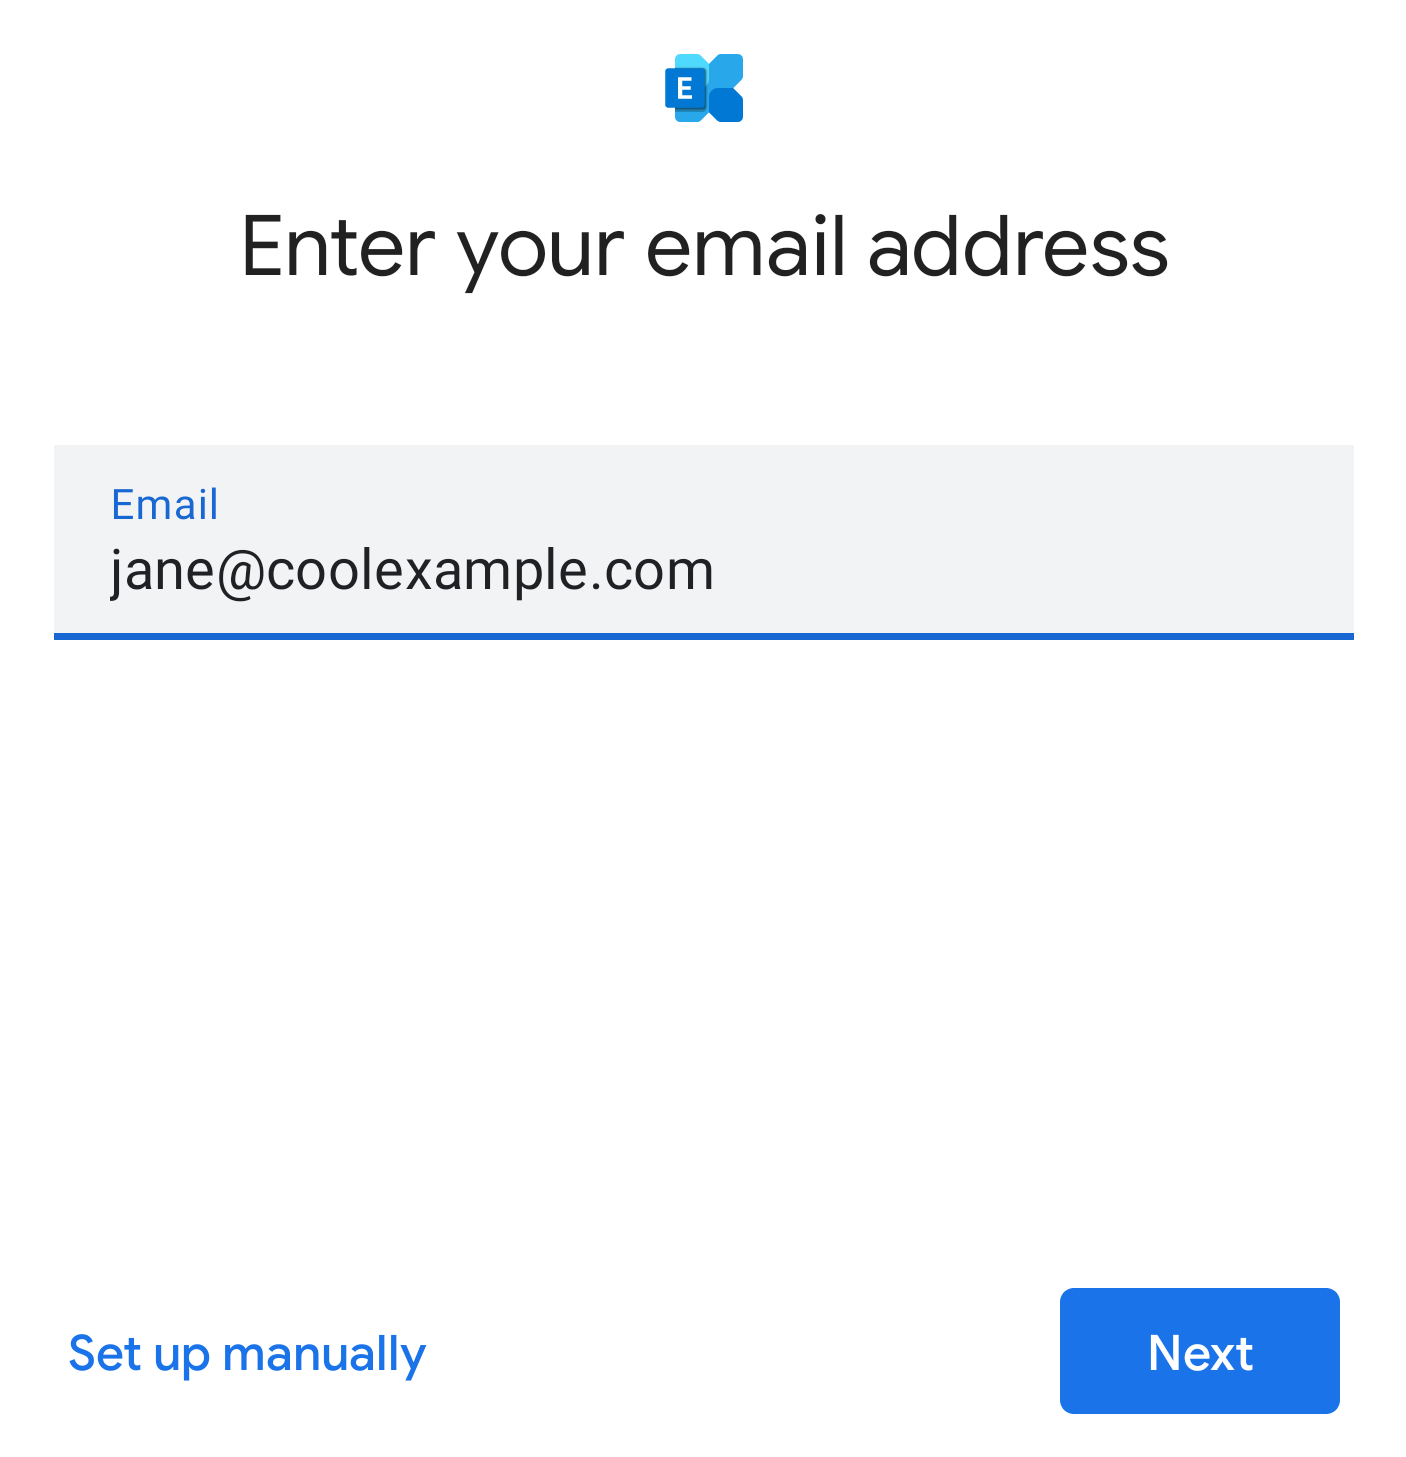 Add my Microsoft 365 email to Gmail on Android | Microsoft 365 from GoDaddy  - GoDaddy Help US